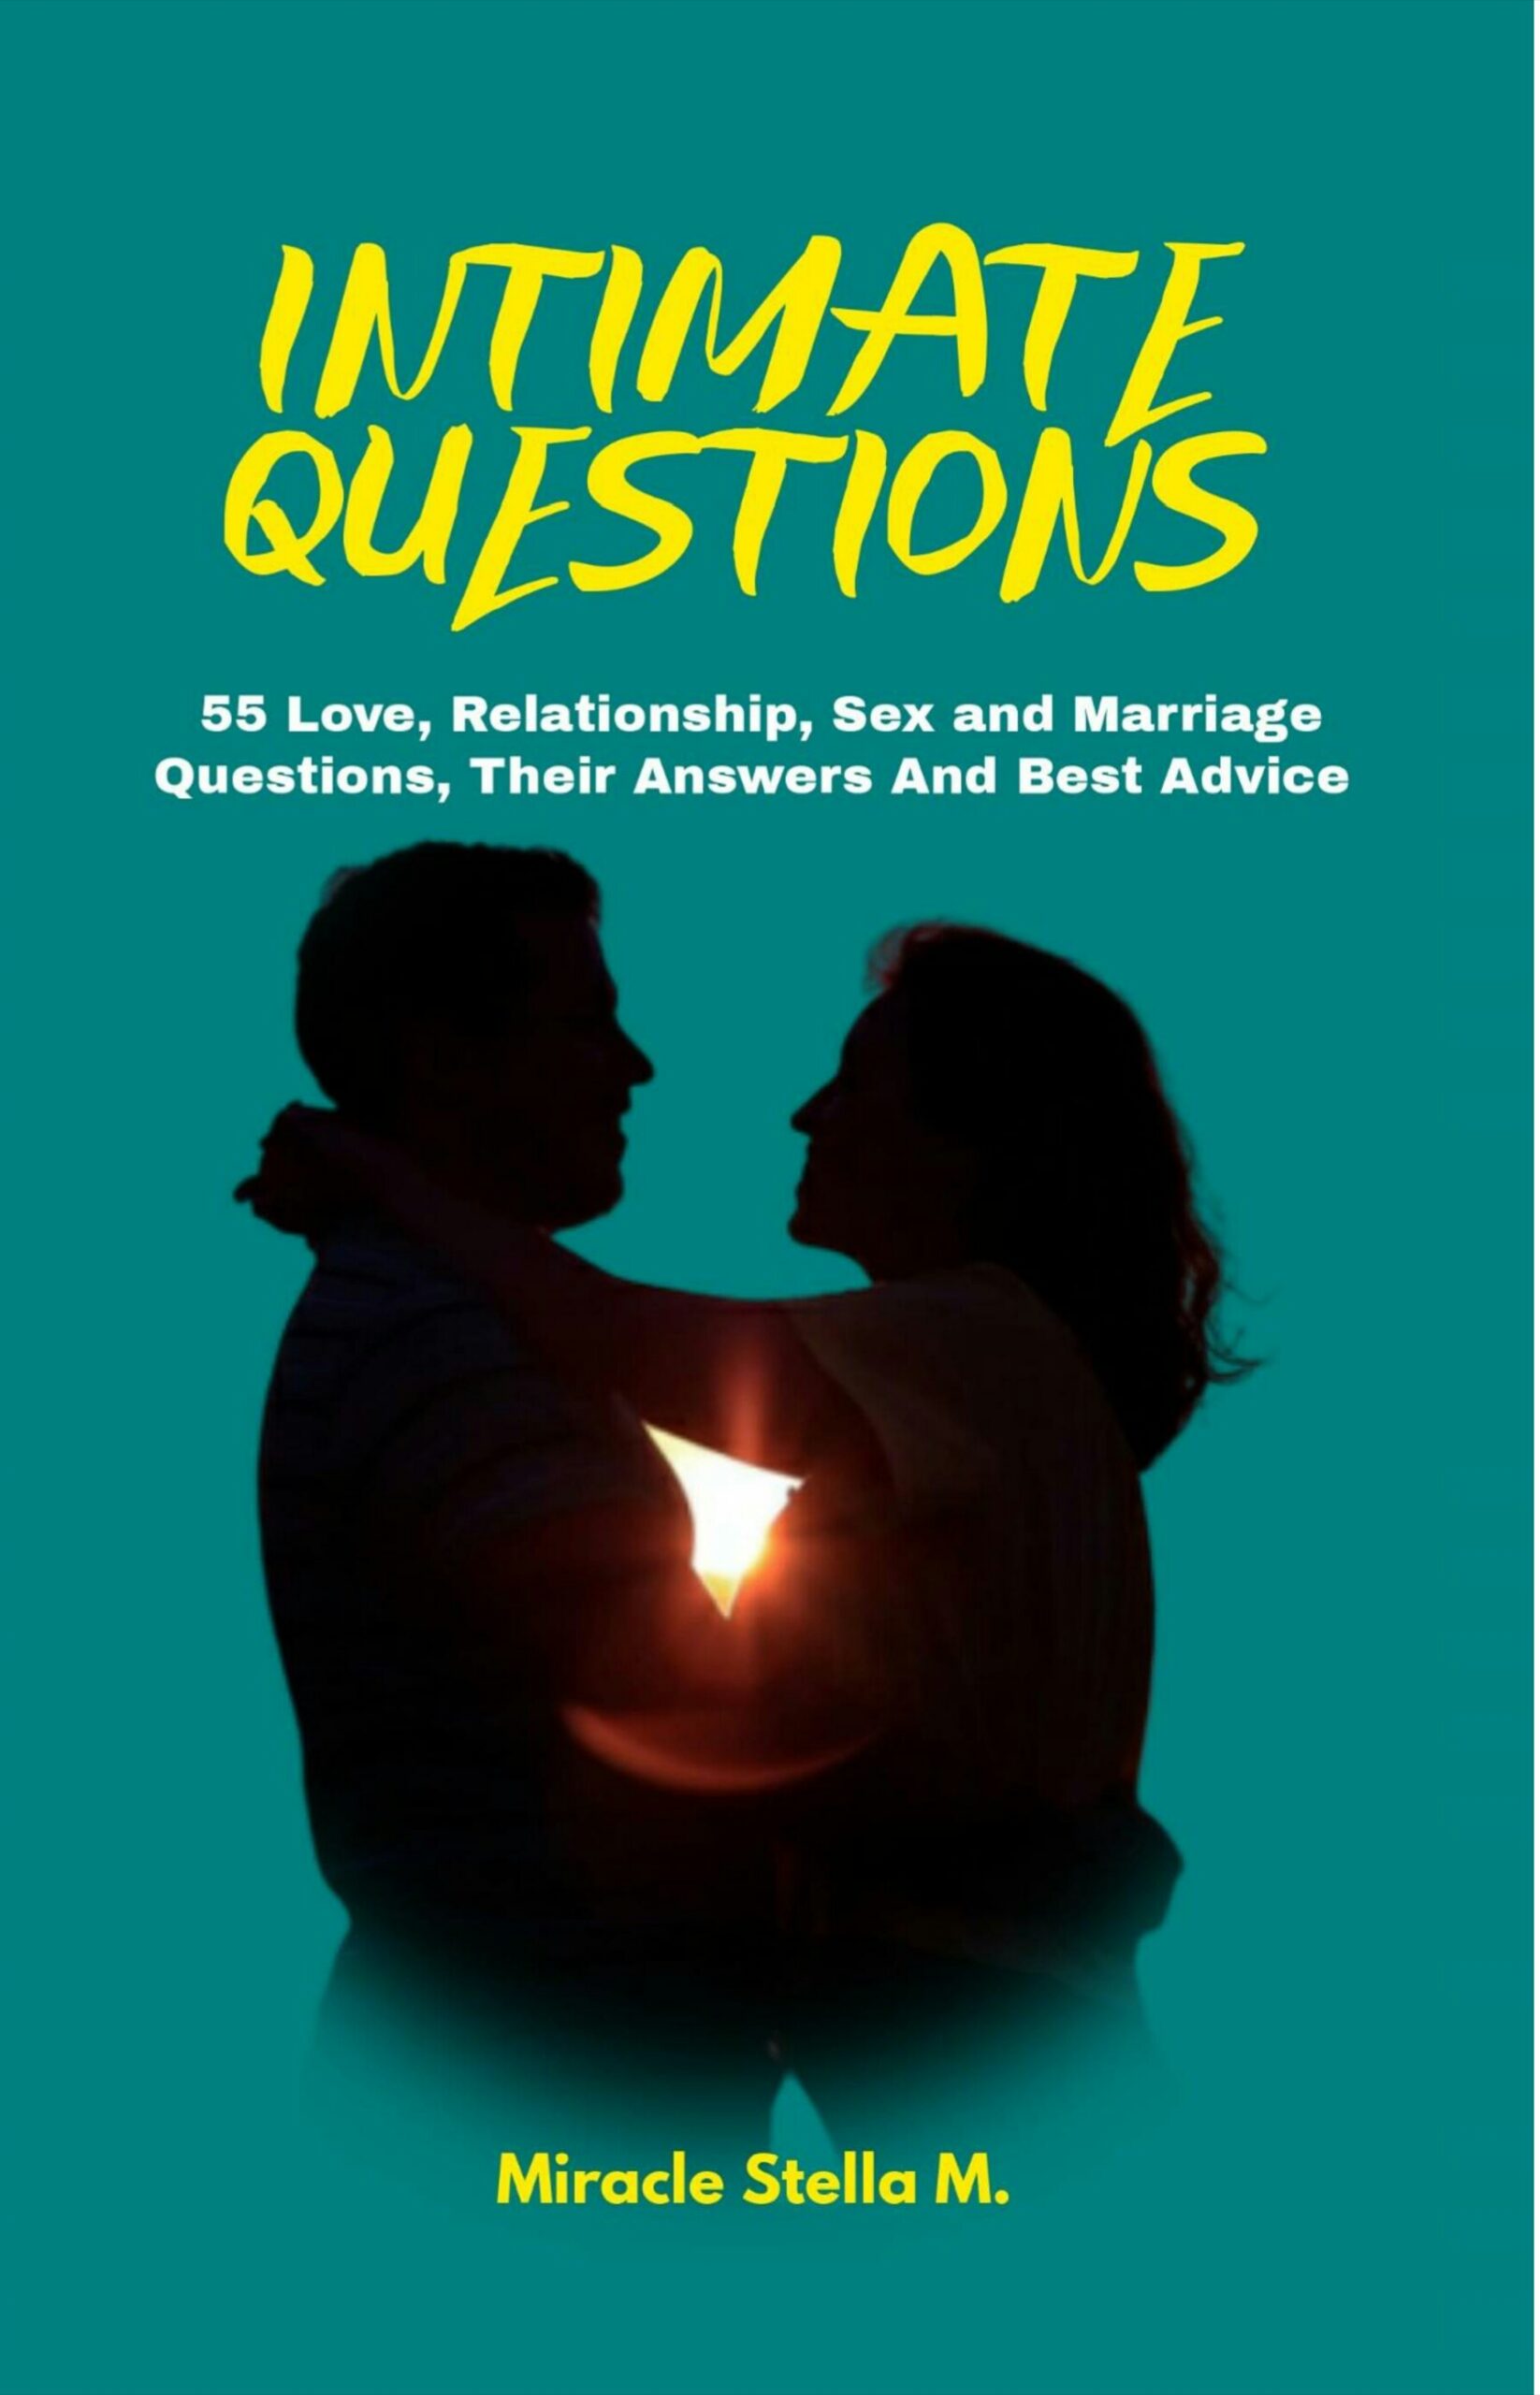 FREE: Intimate Questions by Miracle Stella M.